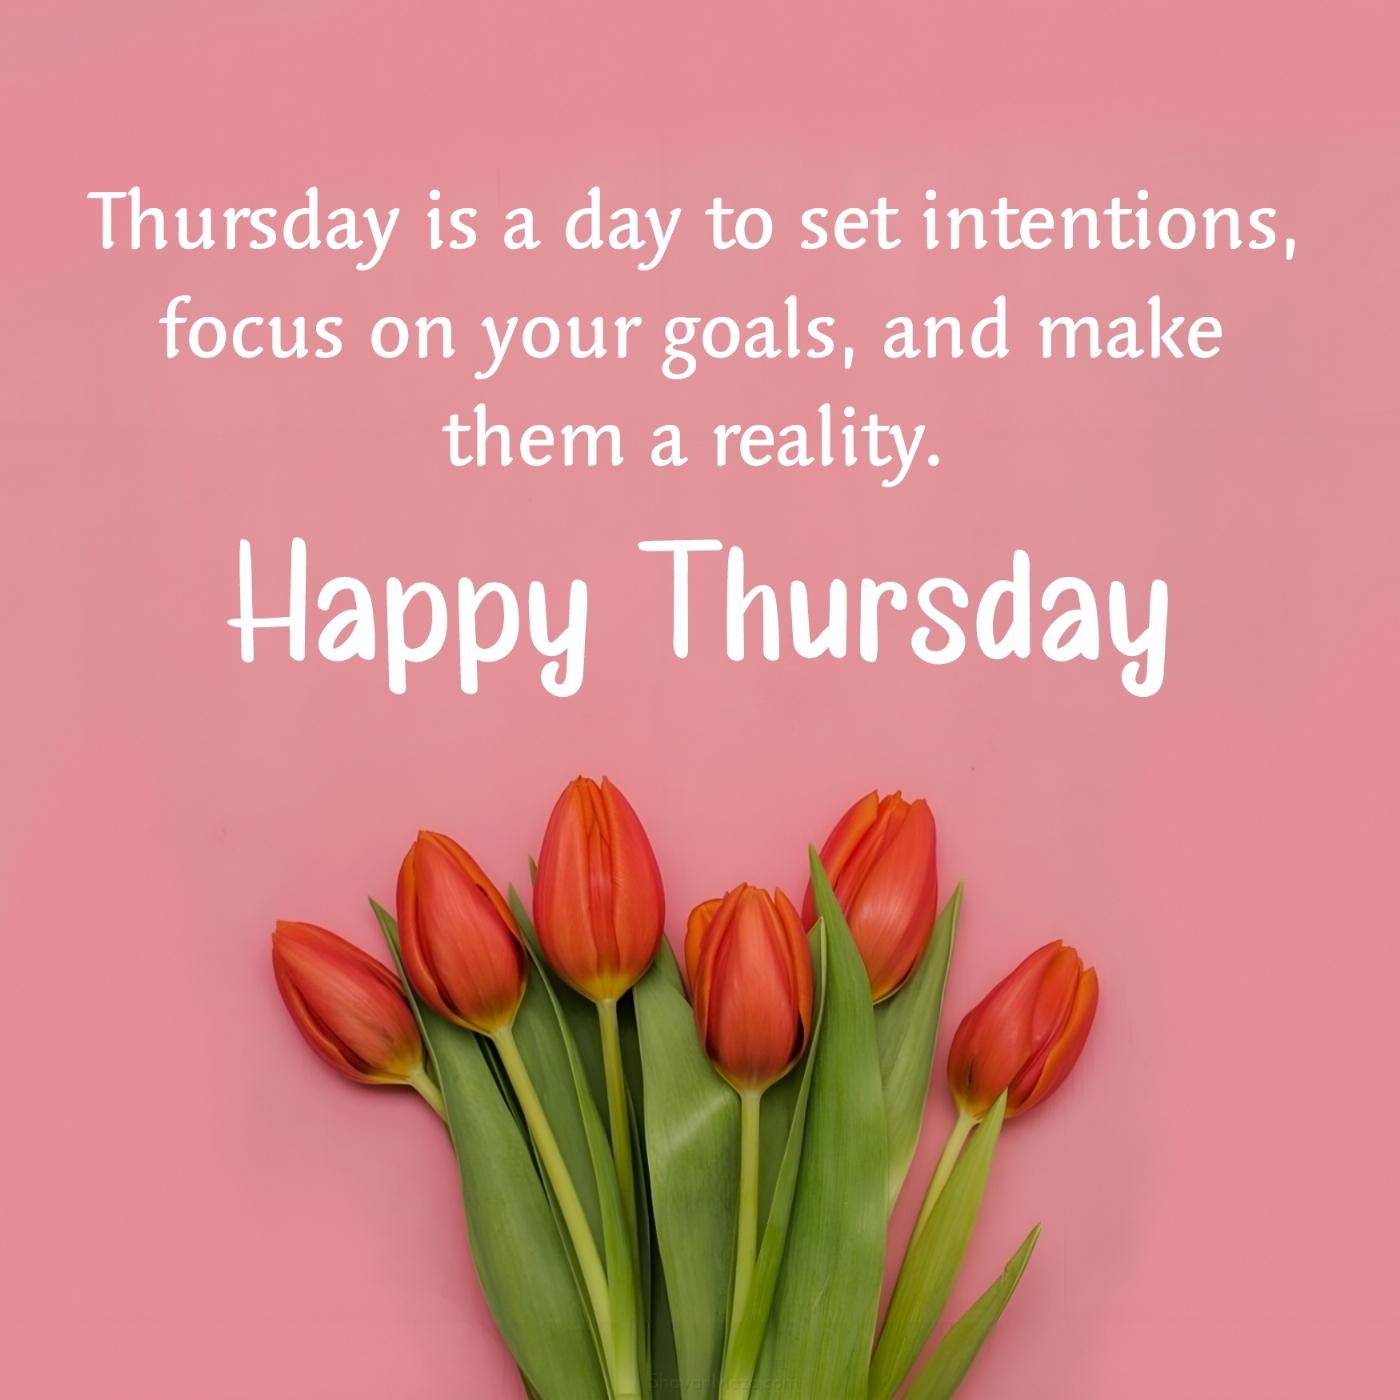 Thursday is a day to set intentions focus on your goals